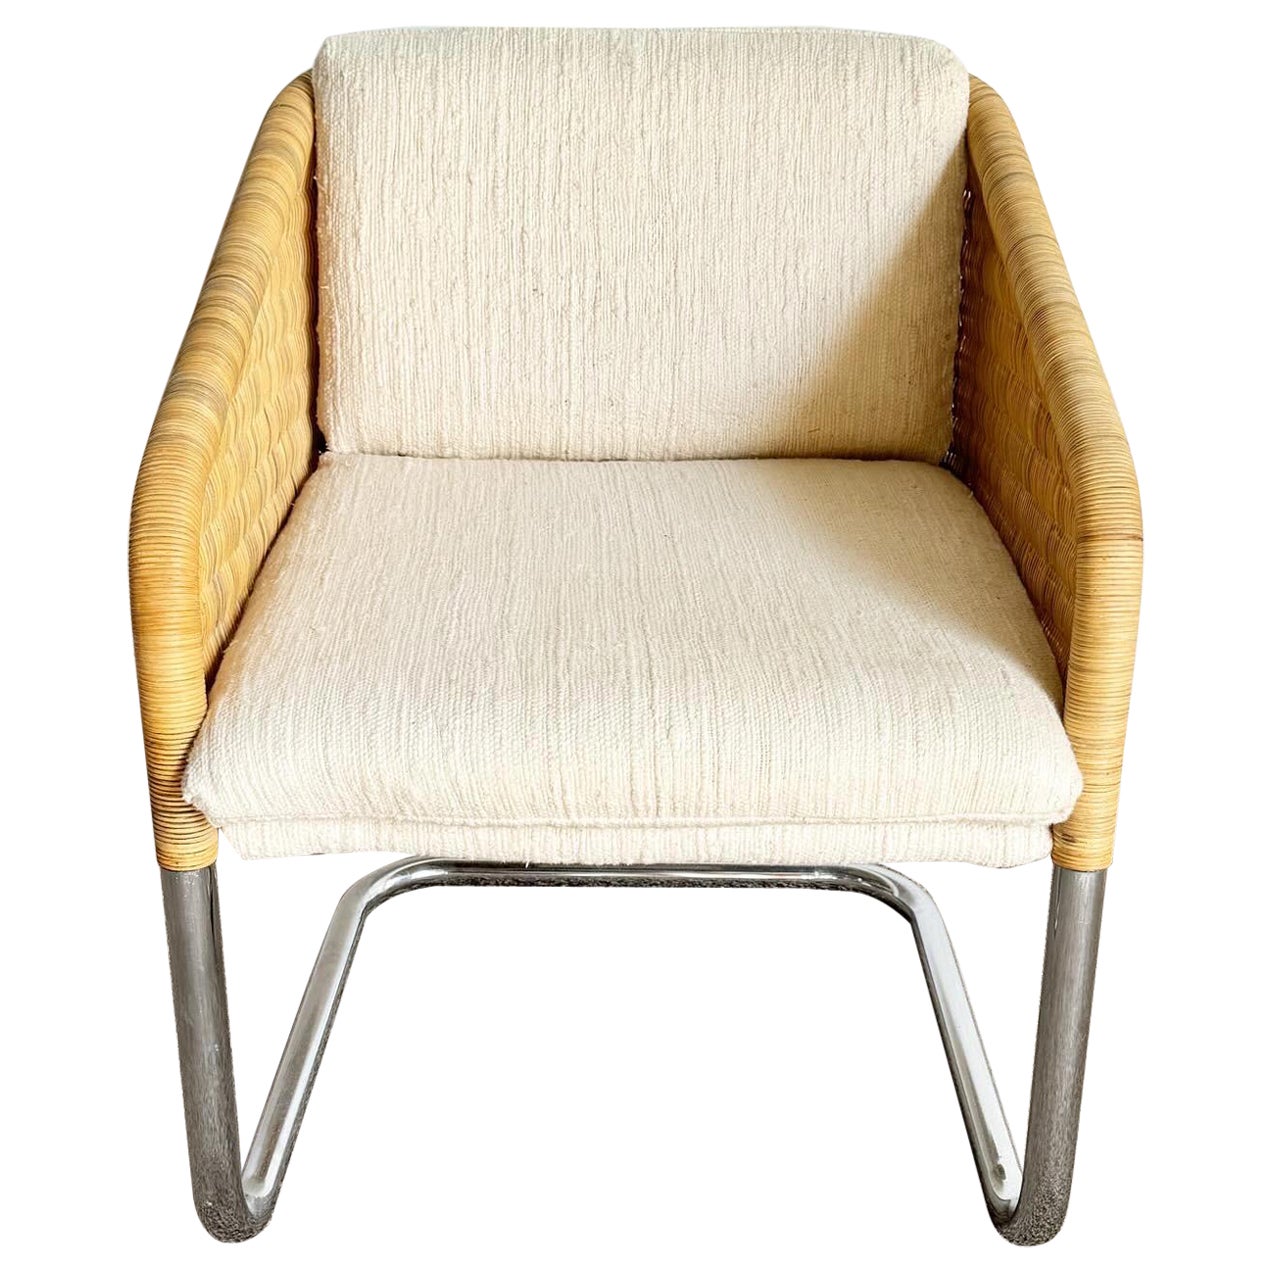 Mid Century Modern Boho Chrome and Wicker Cantilever Arm Chair For Sale